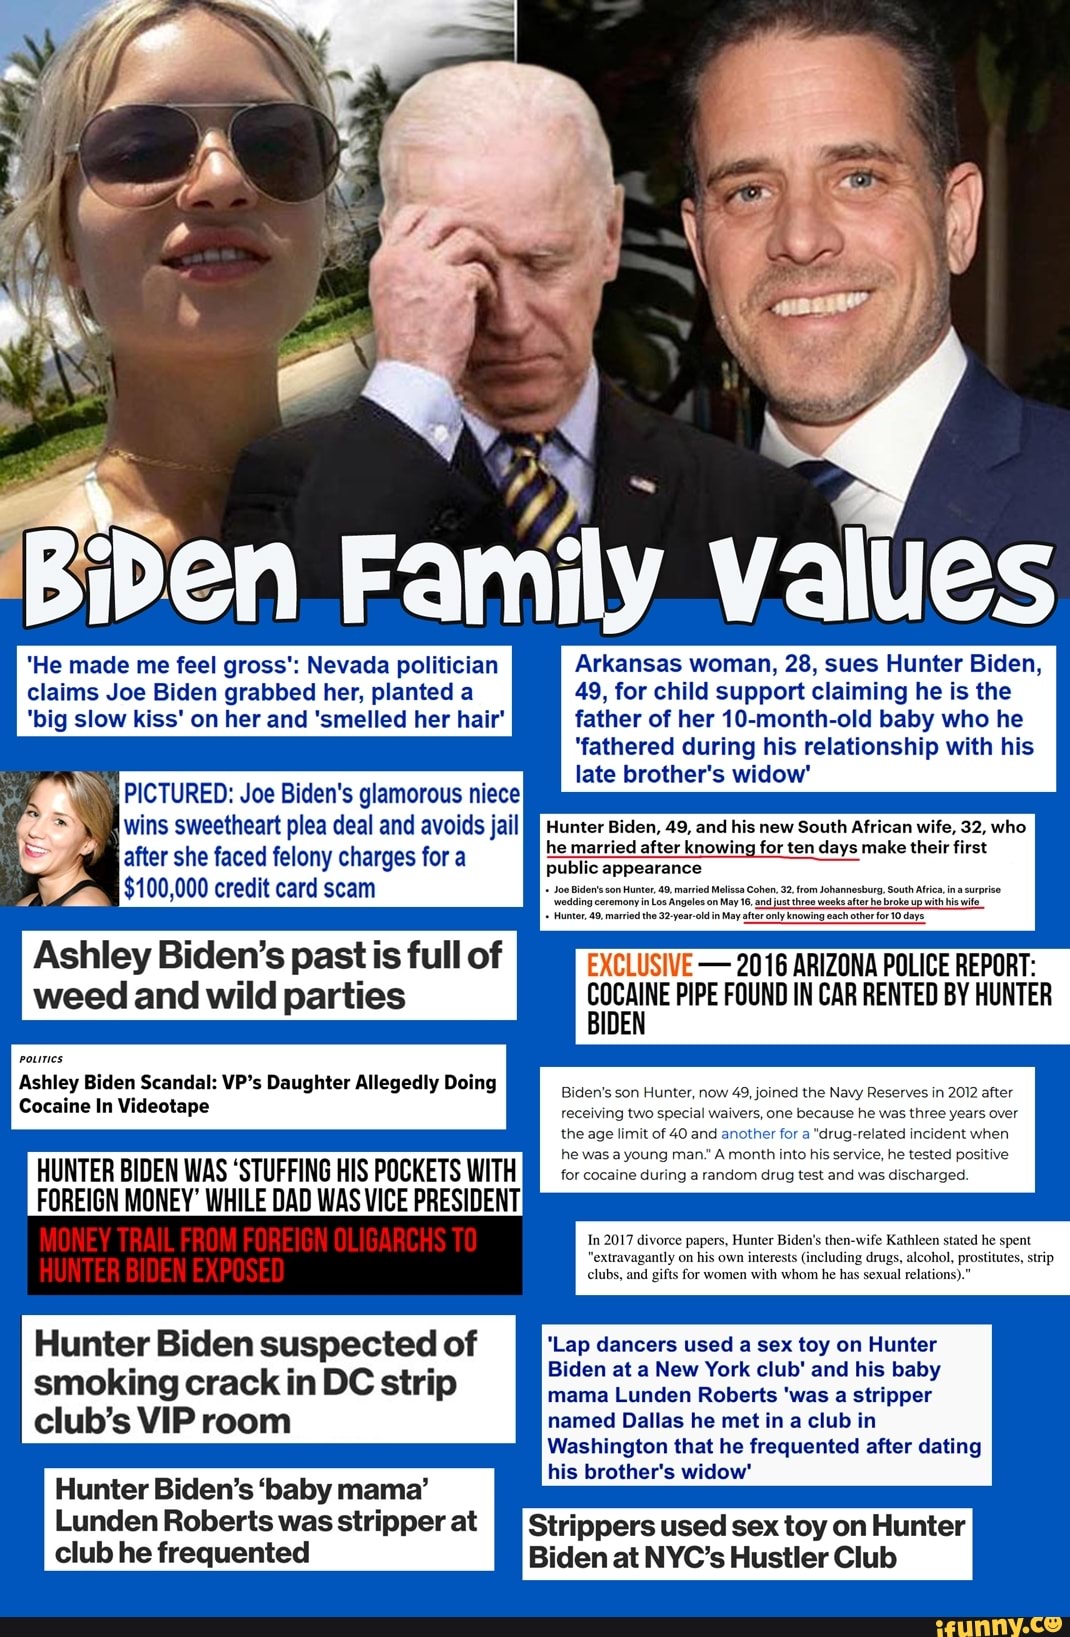 Ben Family values &#39;He made me feel gross&#39;: Nevada politician claims Joe  Biden grabbed her, planted a &#39;big slow kiss&#39; on her and &#39;smelled her hair&#39;  PICTURED: Joe Biden&#39;s glamorous niece wins